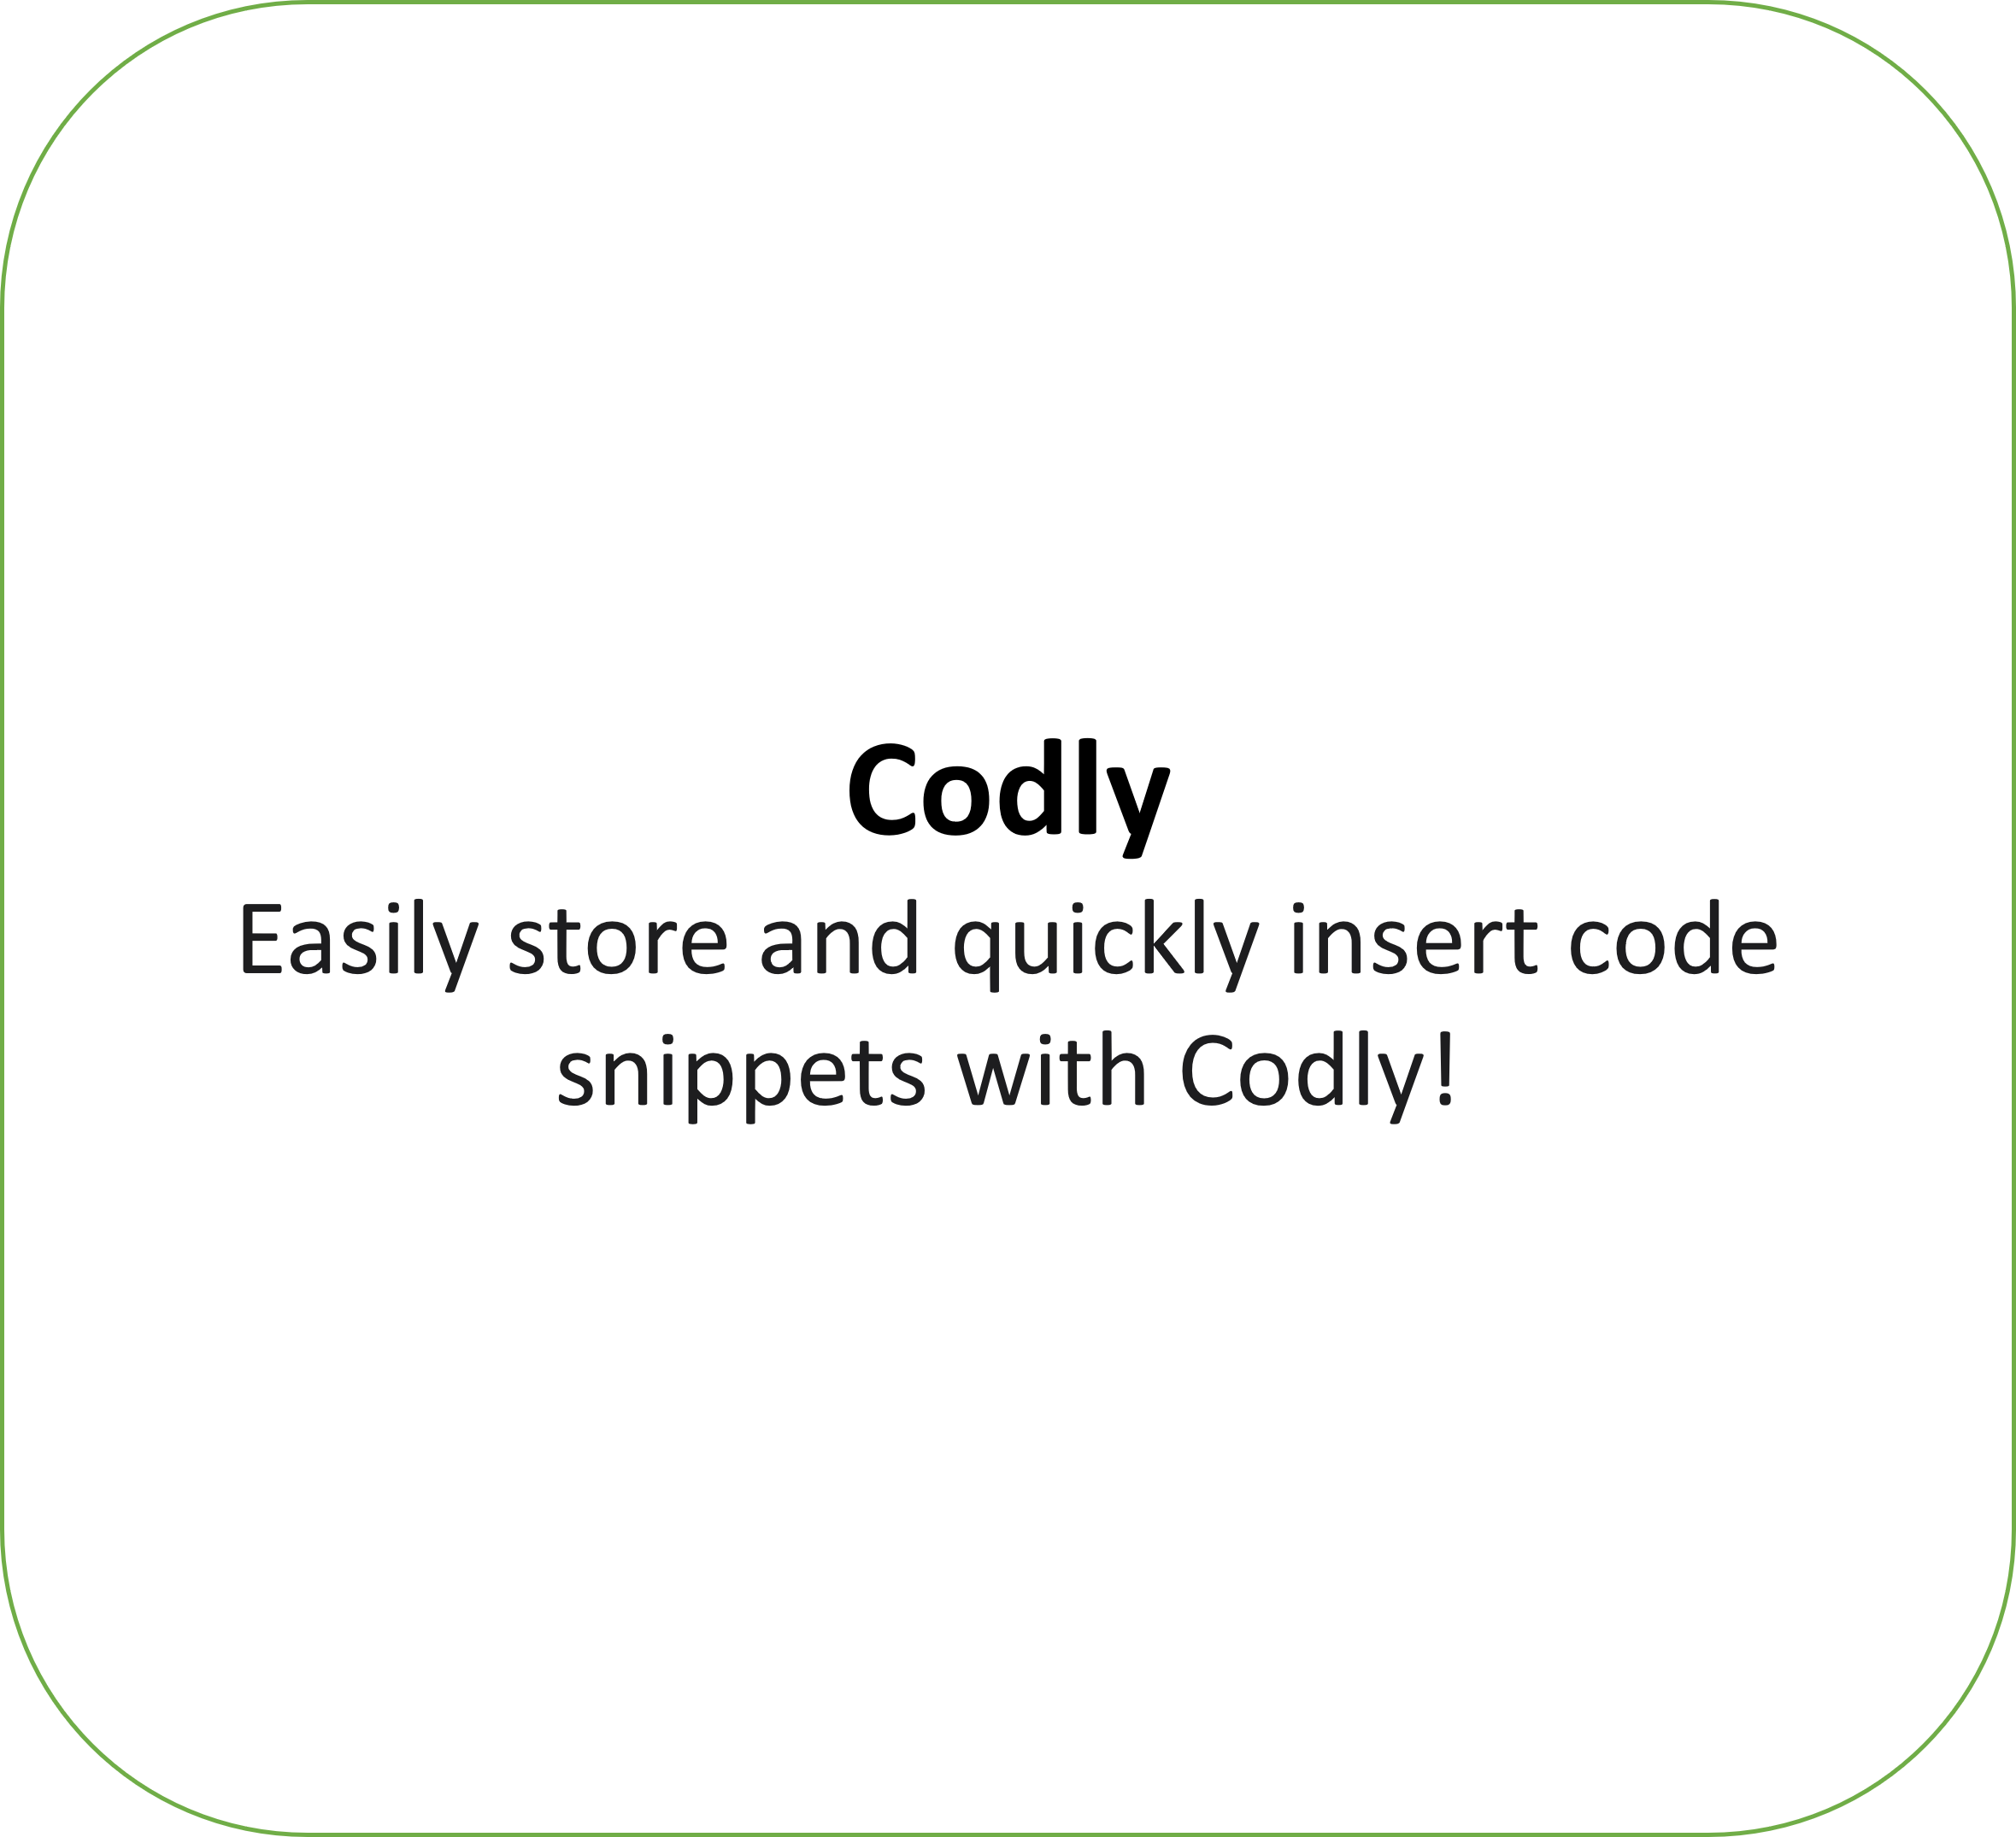 Codly